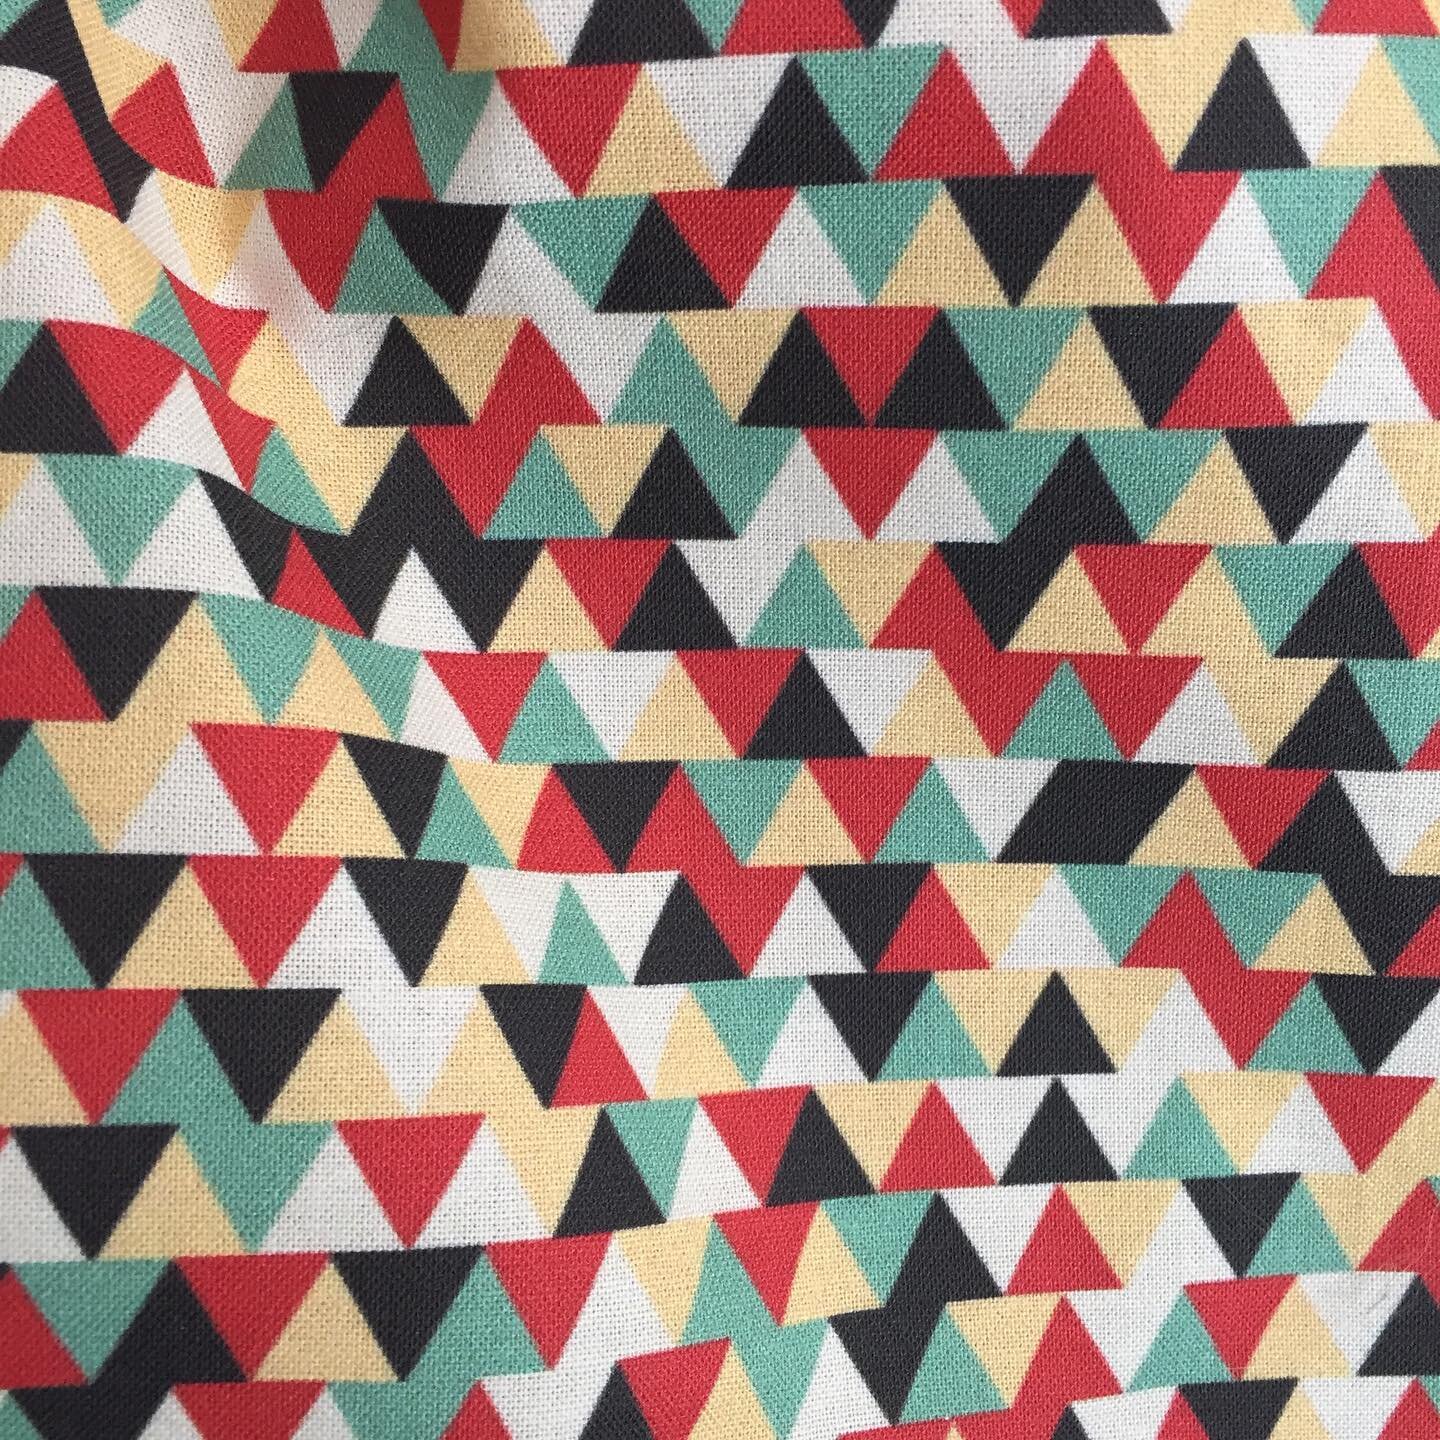 This colour palette for my retro triangles pattern was inspired by vintage kitchen linoleum - I love how it looks on fabric ❤️

#sallycummingsdesigns #fabricdesign #textiledesign #patterndesign #spoonflower #spoonflowerfabric